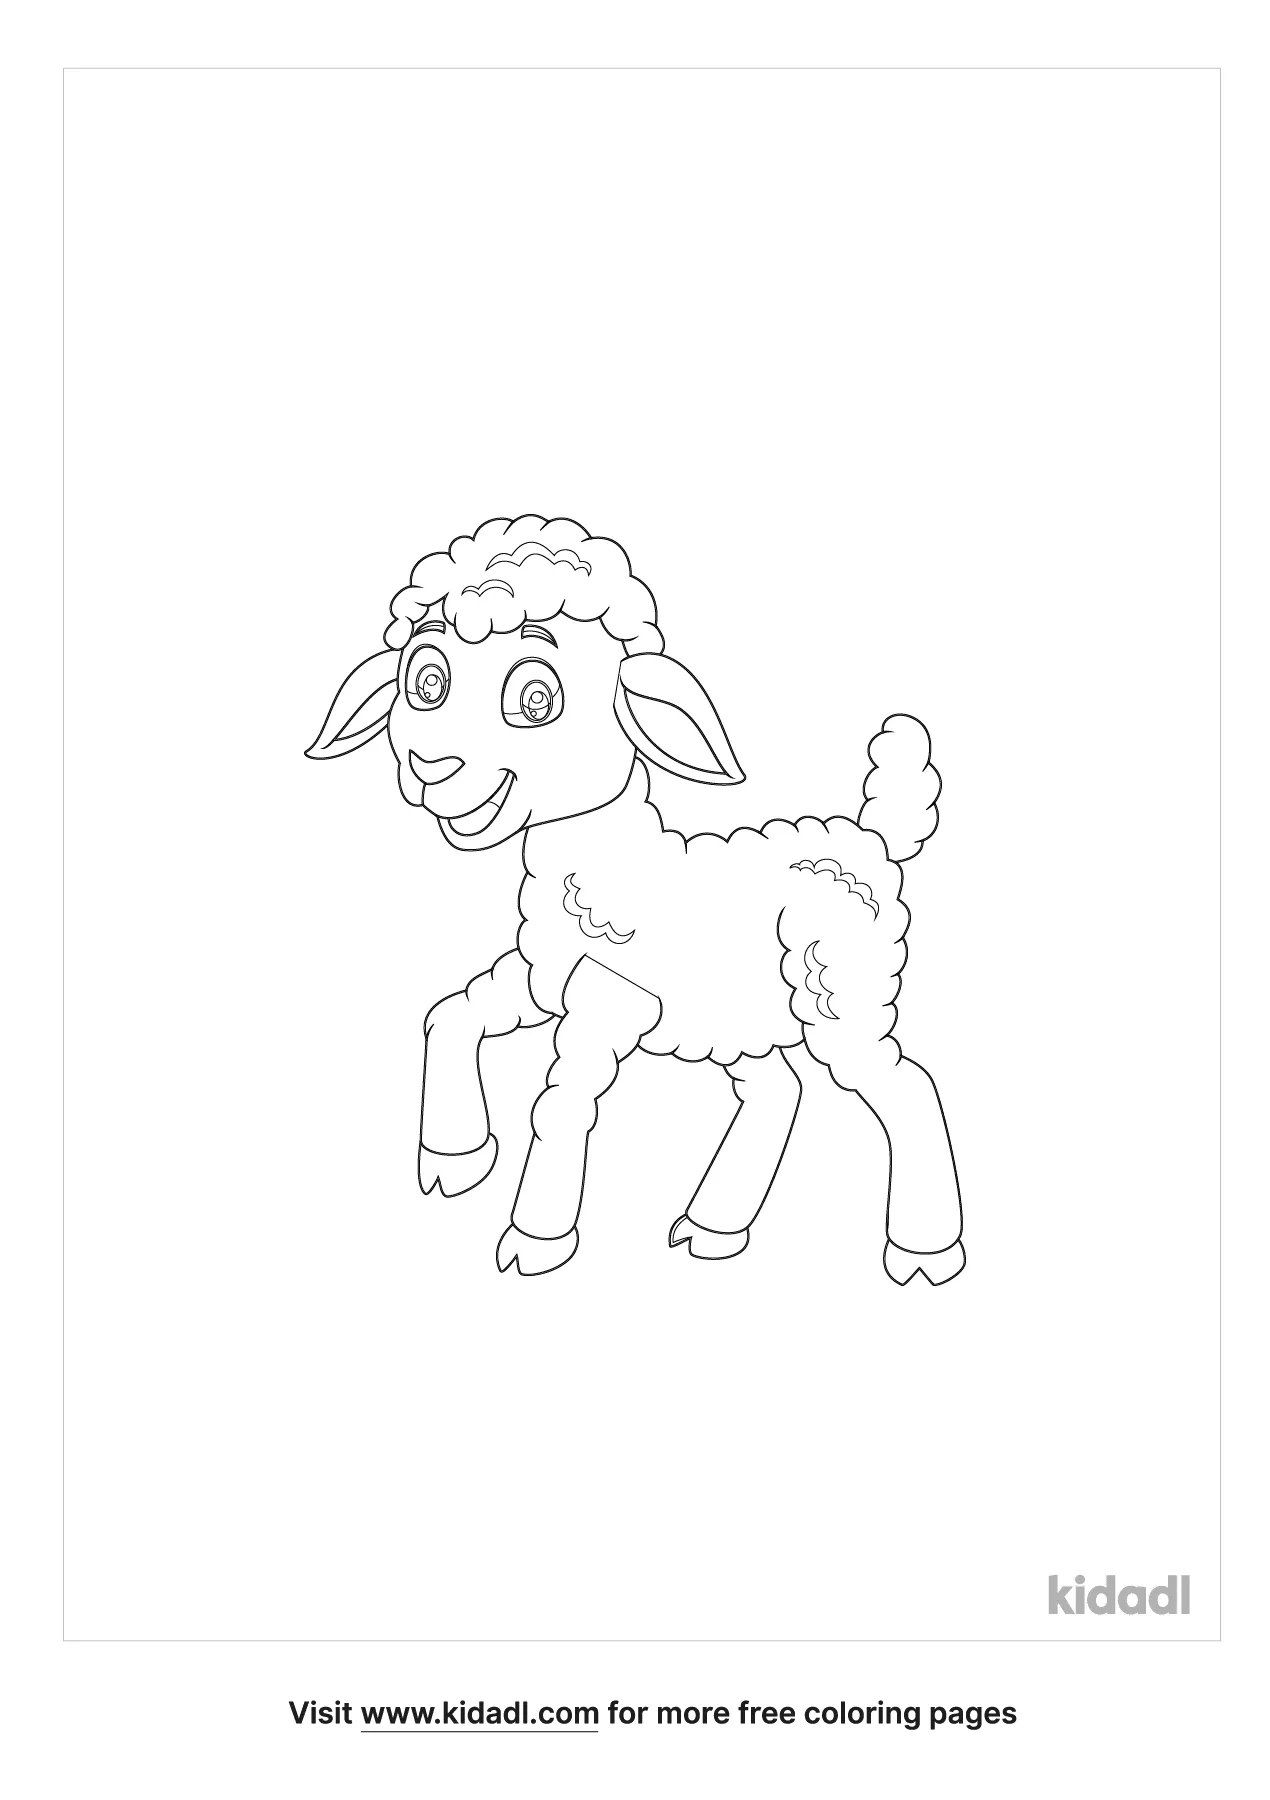 Cute Lambs Coloring Page